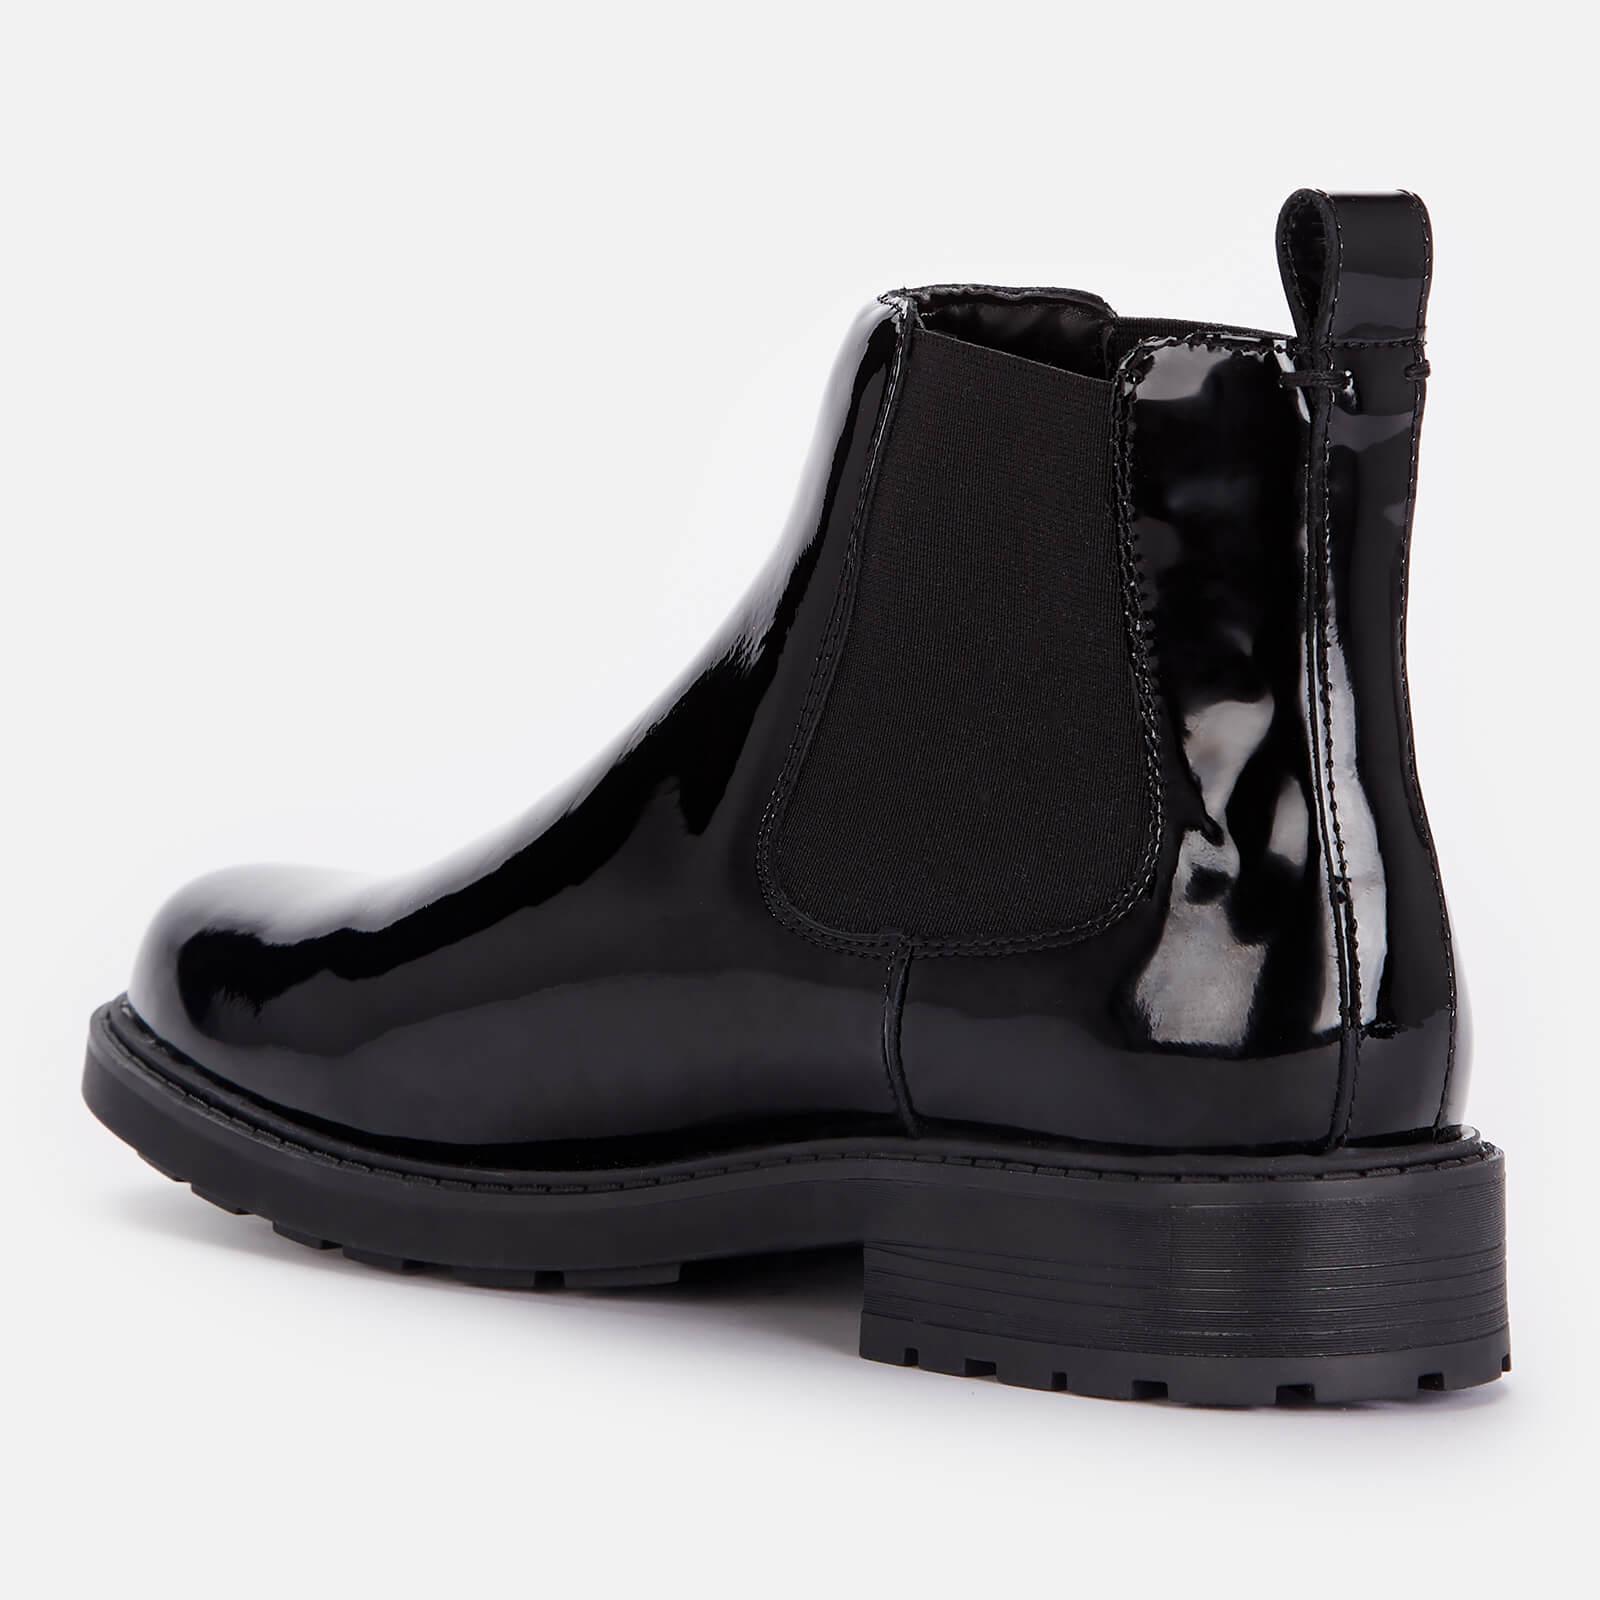 Clarks Leather Orinoco 2 Lane Patent Chelsea Boots in Black - Lyst